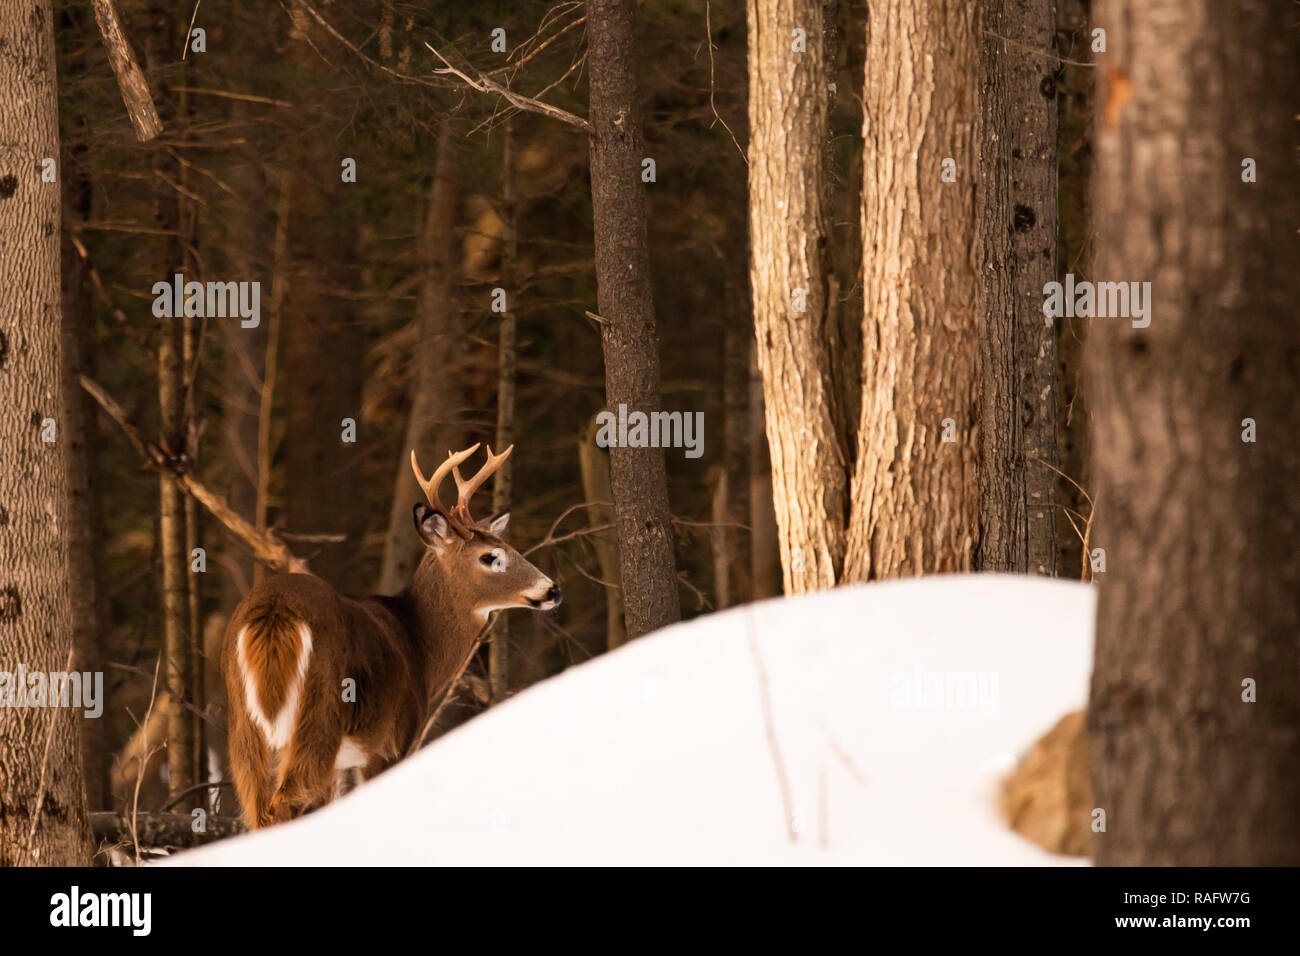 An elusive trophy whitetail deer buck hiding behind a snow drift in the Adirondack Mountains wilderness. Stock Photo